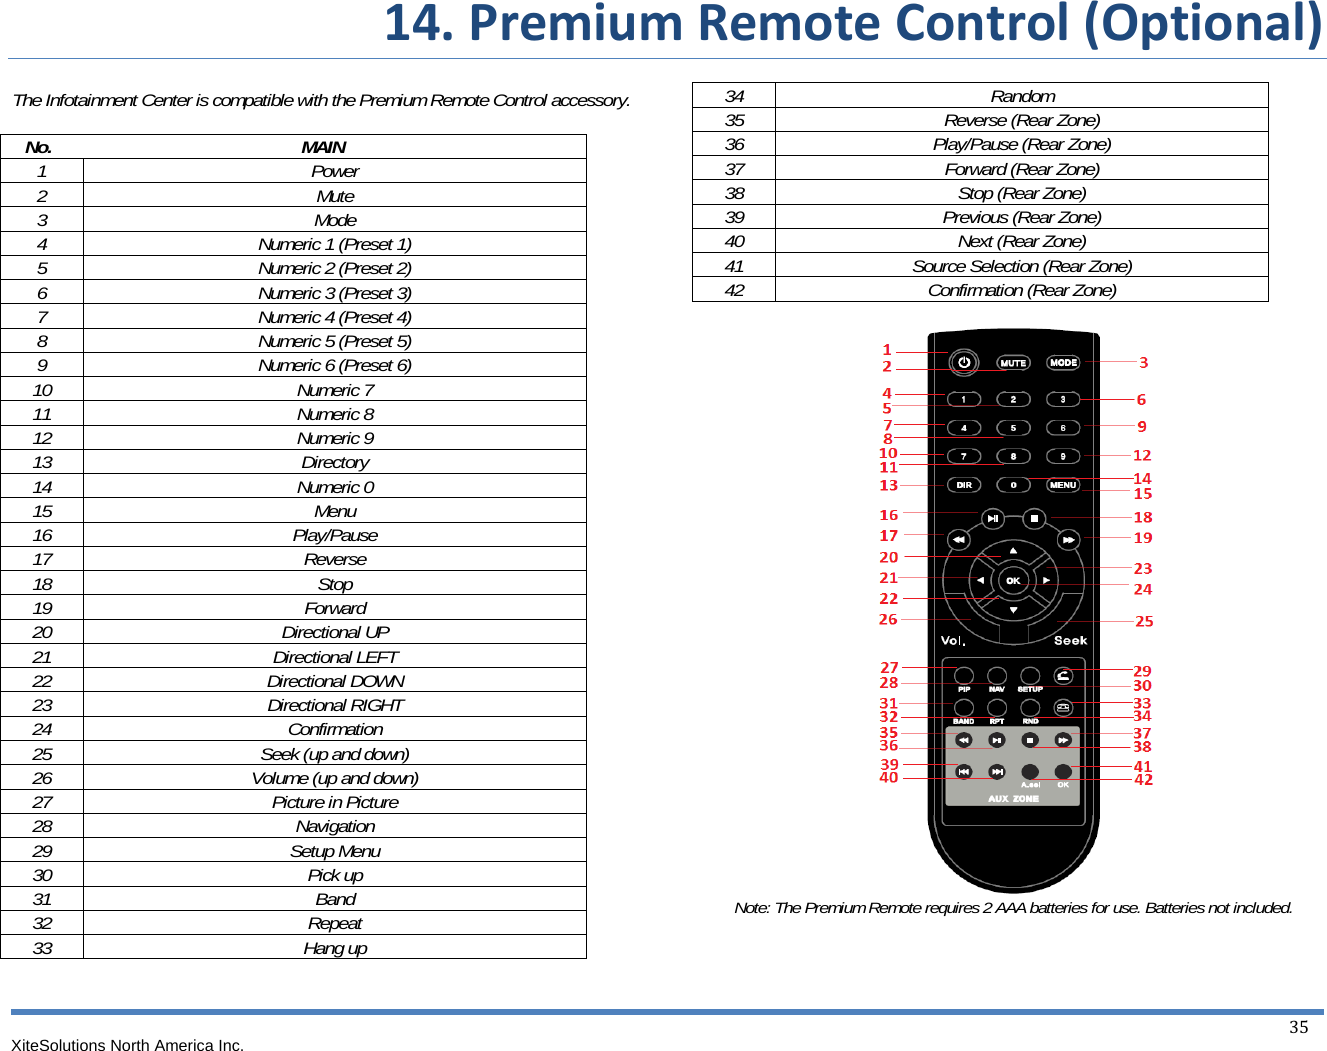  14.PremiumRemoteControl(Optional)XiteSolutions North America Inc.  35 The Infotainment Center is compatible with the Premium Remote Control accessory.     No.                                                      MAIN 1 Power 2 Mute 3 Mode 4  Numeric 1 (Preset 1) 5  Numeric 2 (Preset 2) 6  Numeric 3 (Preset 3) 7  Numeric 4 (Preset 4) 8  Numeric 5 (Preset 5) 9  Numeric 6 (Preset 6) 10 Numeric 7 11 Numeric 8 12 Numeric 9 13 Directory 14 Numeric 0 15 Menu 16 Play/Pause 17 Reverse 18 Stop 19 Forward 20 Directional UP 21 Directional LEFT 22 Directional DOWN 23 Directional RIGHT 24 Confirmation 25  Seek (up and down) 26  Volume (up and down) 27  Picture in Picture 28 Navigation 29 Setup Menu 30 Pick up 31 Band 32 Repeat 33 Hang up   34 Random 35 Reverse (Rear Zone) 36  Play/Pause (Rear Zone) 37 Forward (Rear Zone) 38  Stop (Rear Zone) 39  Previous (Rear Zone) 40  Next (Rear Zone) 41  Source Selection (Rear Zone) 42  Confirmation (Rear Zone)   Note: The Premium Remote requires 2 AAA batteries for use. Batteries not included.